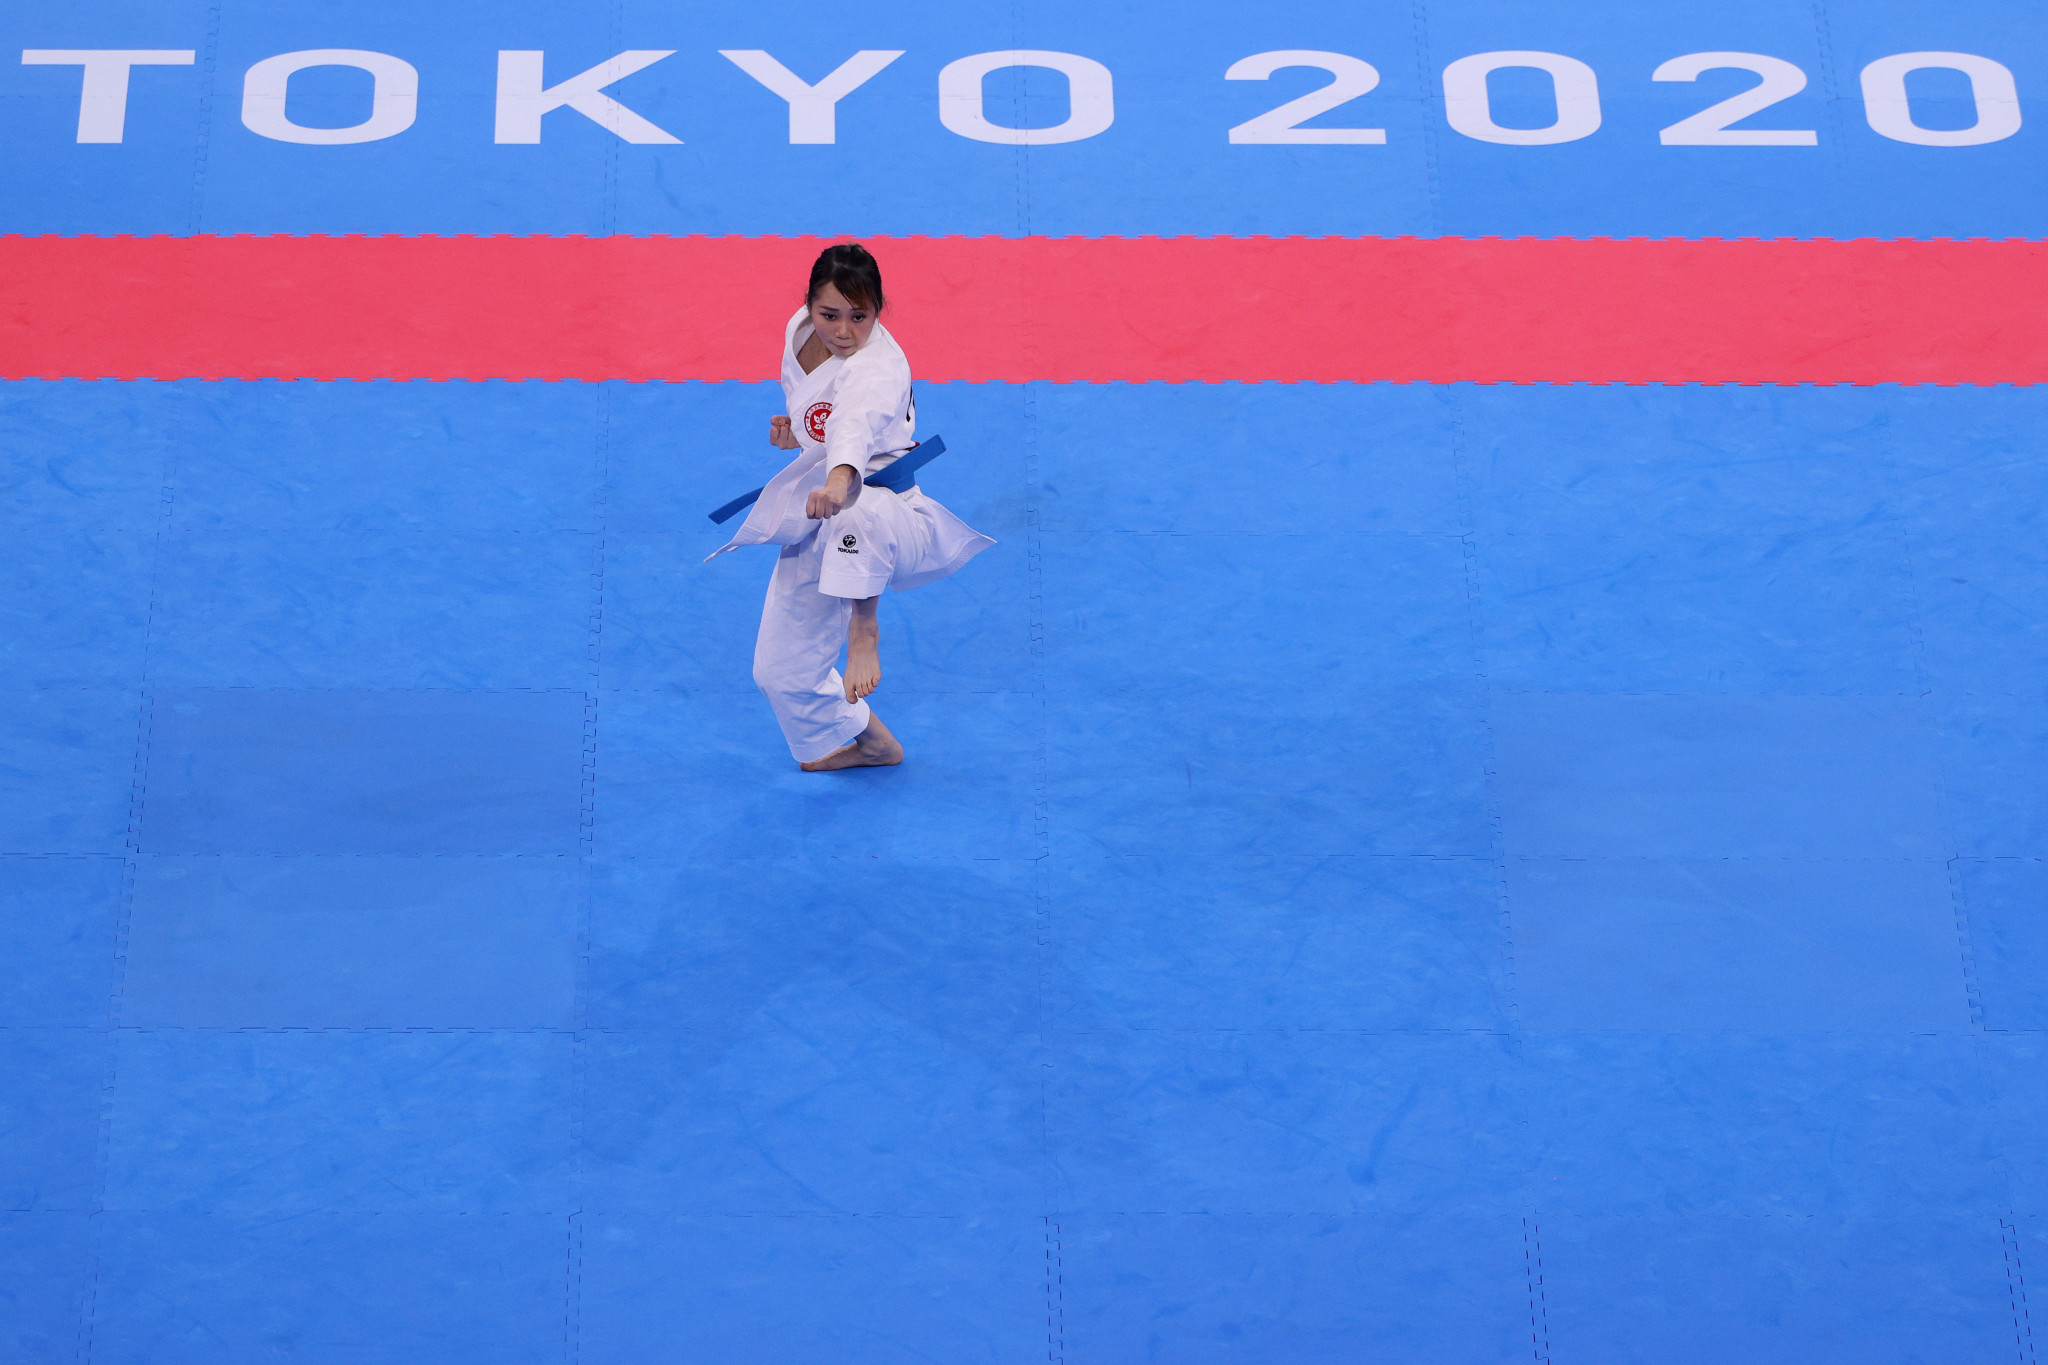 Hong Kong karate squad capable of winning five Asian Games medals, claims coach